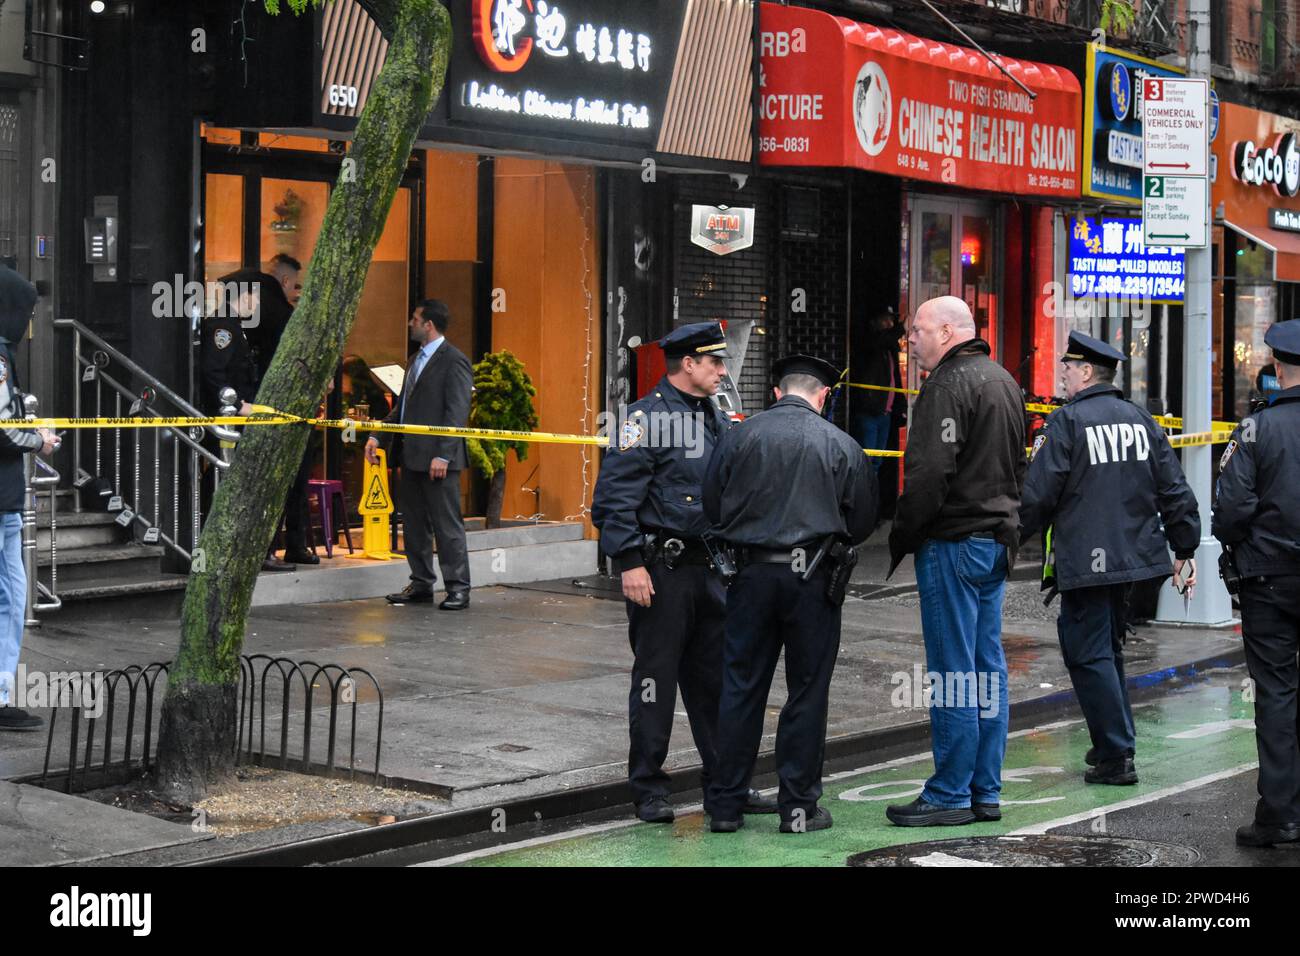 Manhattan, United States. 29th Apr, 2023. A man and police officers seen during the investigation. Police investigate the shooting incident. Shooting in Manhattan, New York, United States on April 29, 2023. At 17:43 Saturday evening one person was shot in the hip and shoulder near the area of 9th Avenue and West 46th Street. According to the New York City Police Department, the person shot is in stable condition. No suspects are captured at this time. (Photo by Kyle Mazza/SOPA Images/Sipa USA) Credit: Sipa USA/Alamy Live News Stock Photo